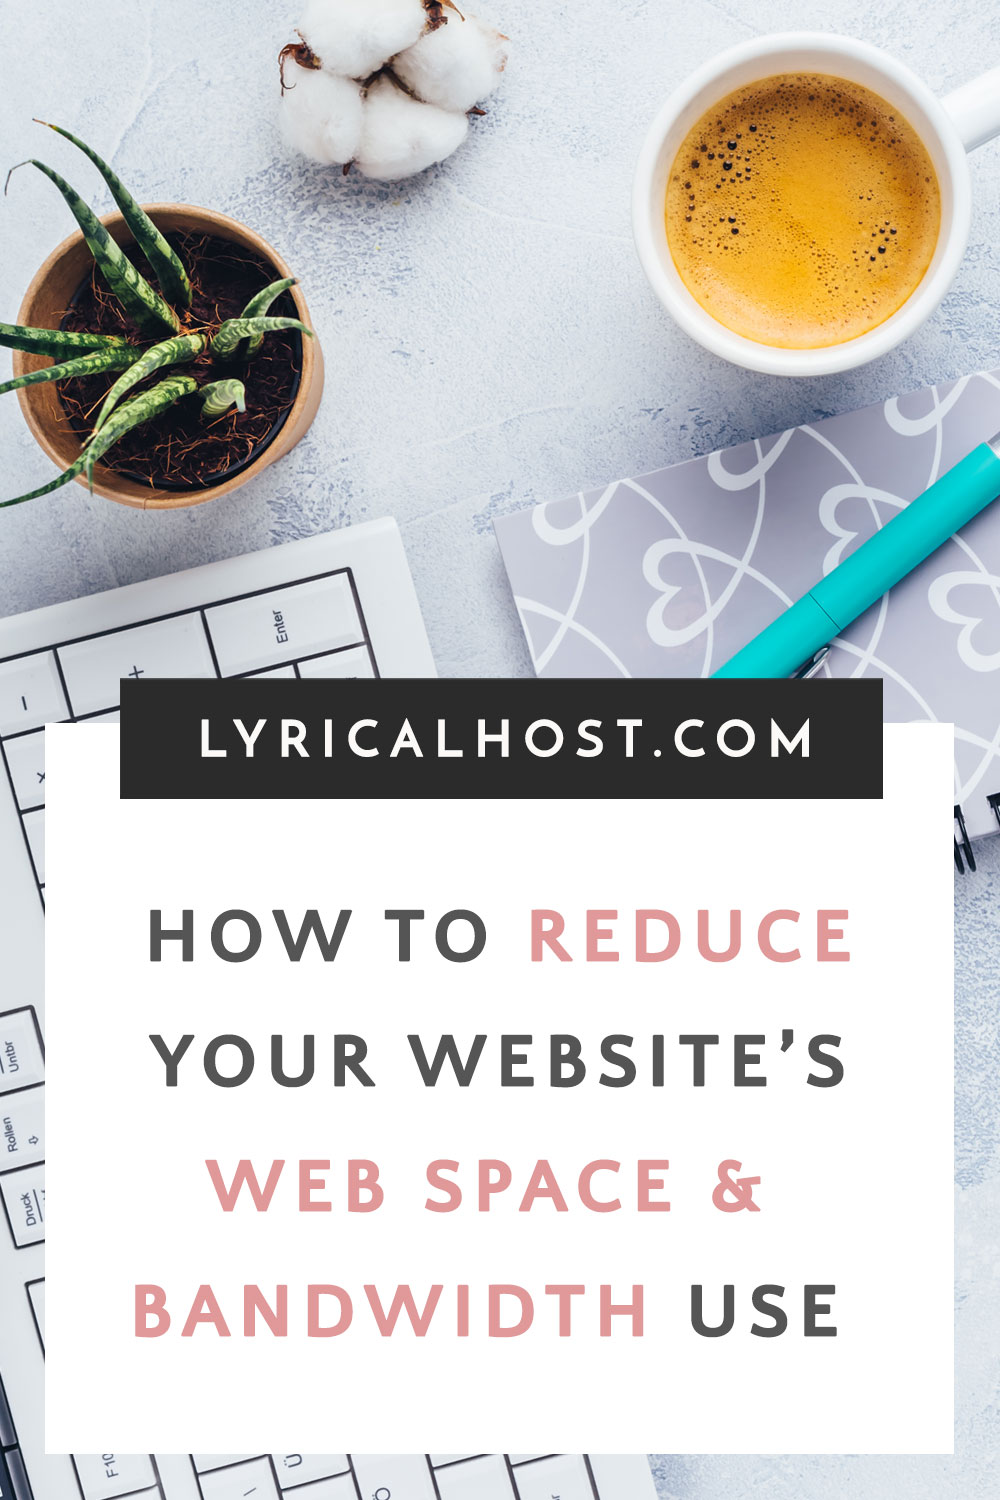 How to reduce your website's web space and bandwidth use